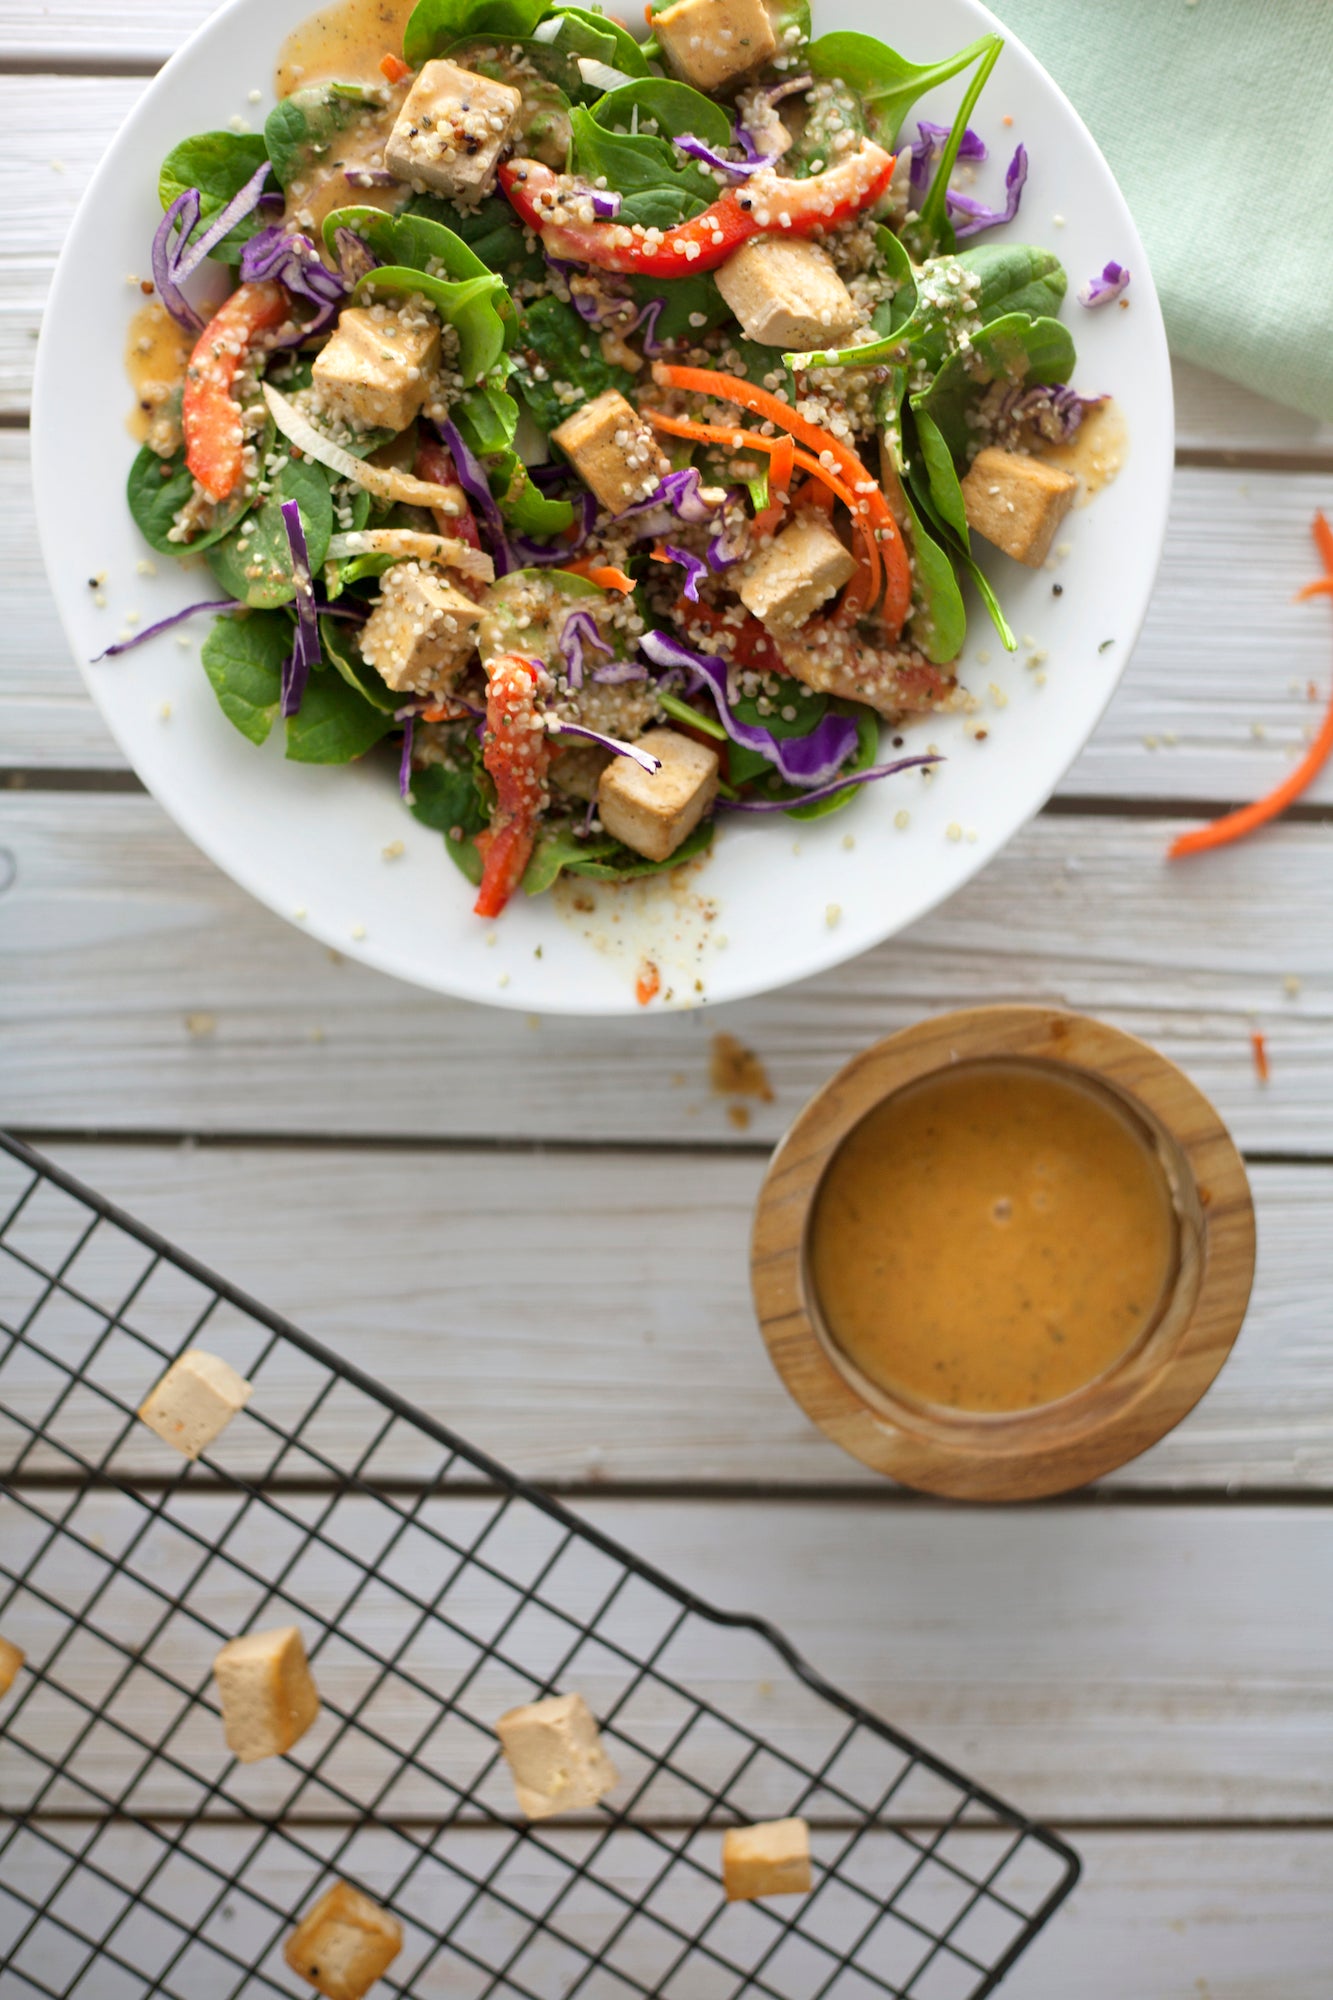 Paprika Spinach Salad with Baked Tofu and Hemp Hearts